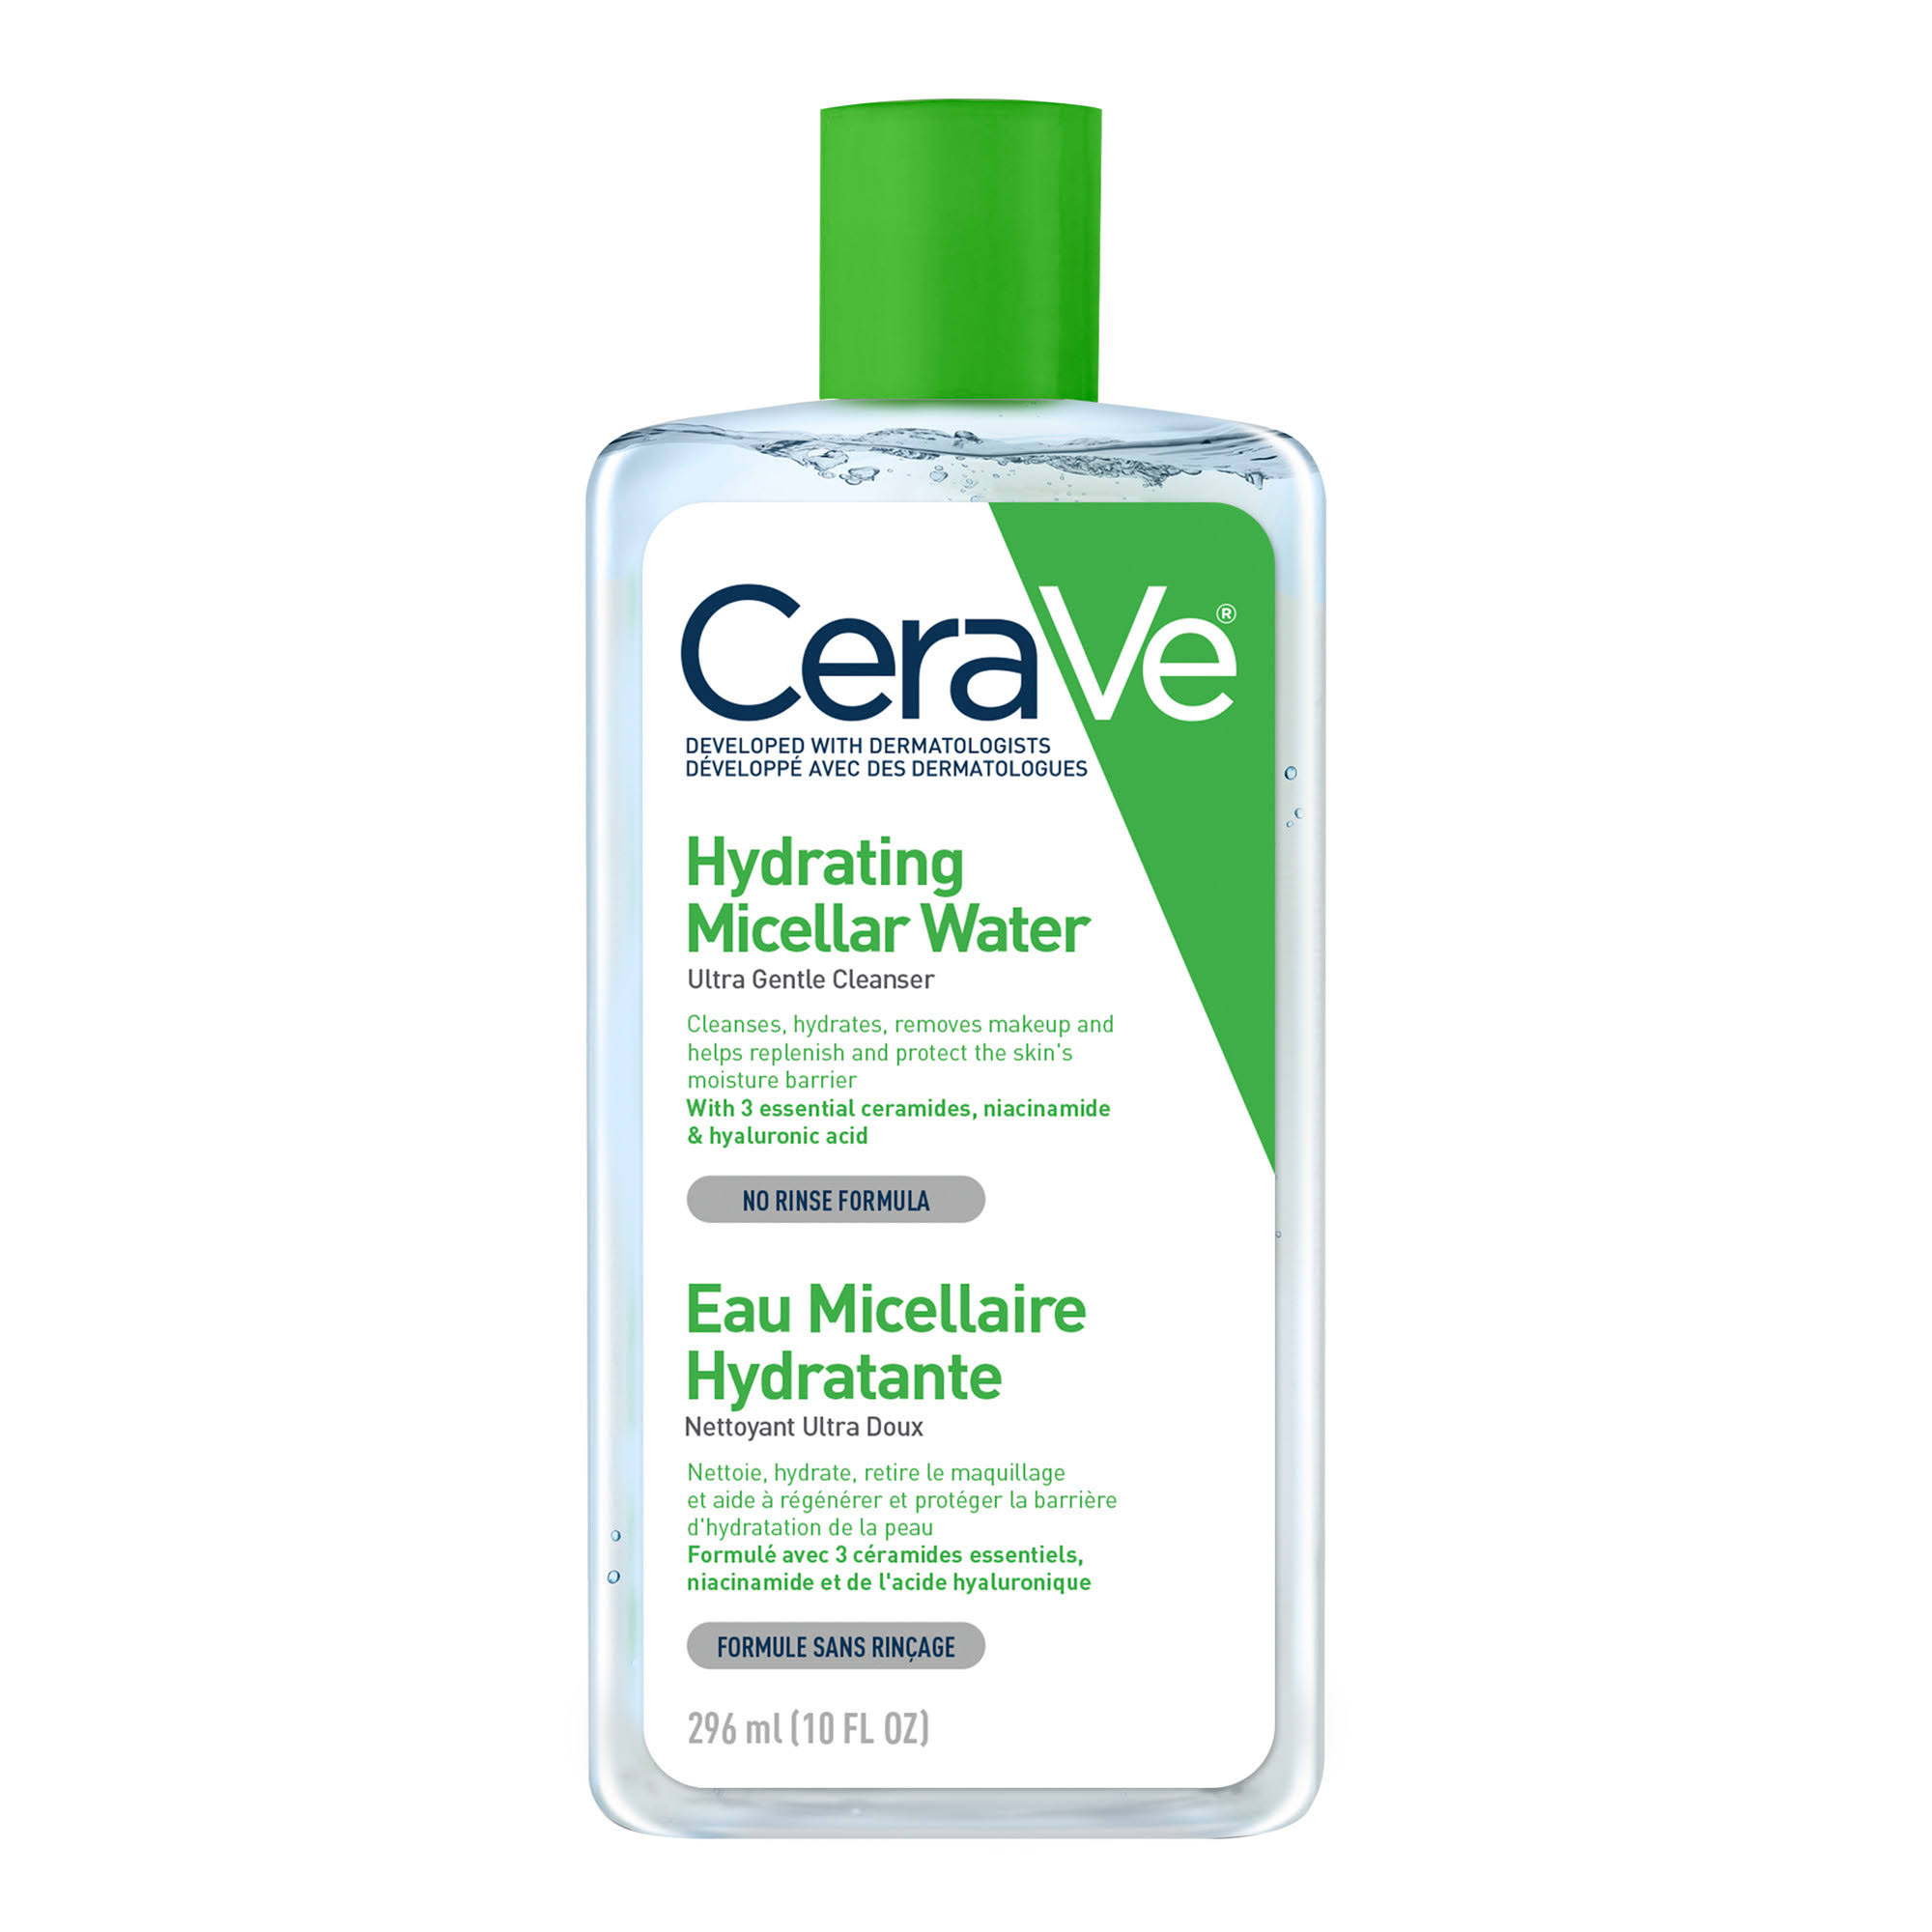 Cerave Hydrating Micellar Water - 10oz